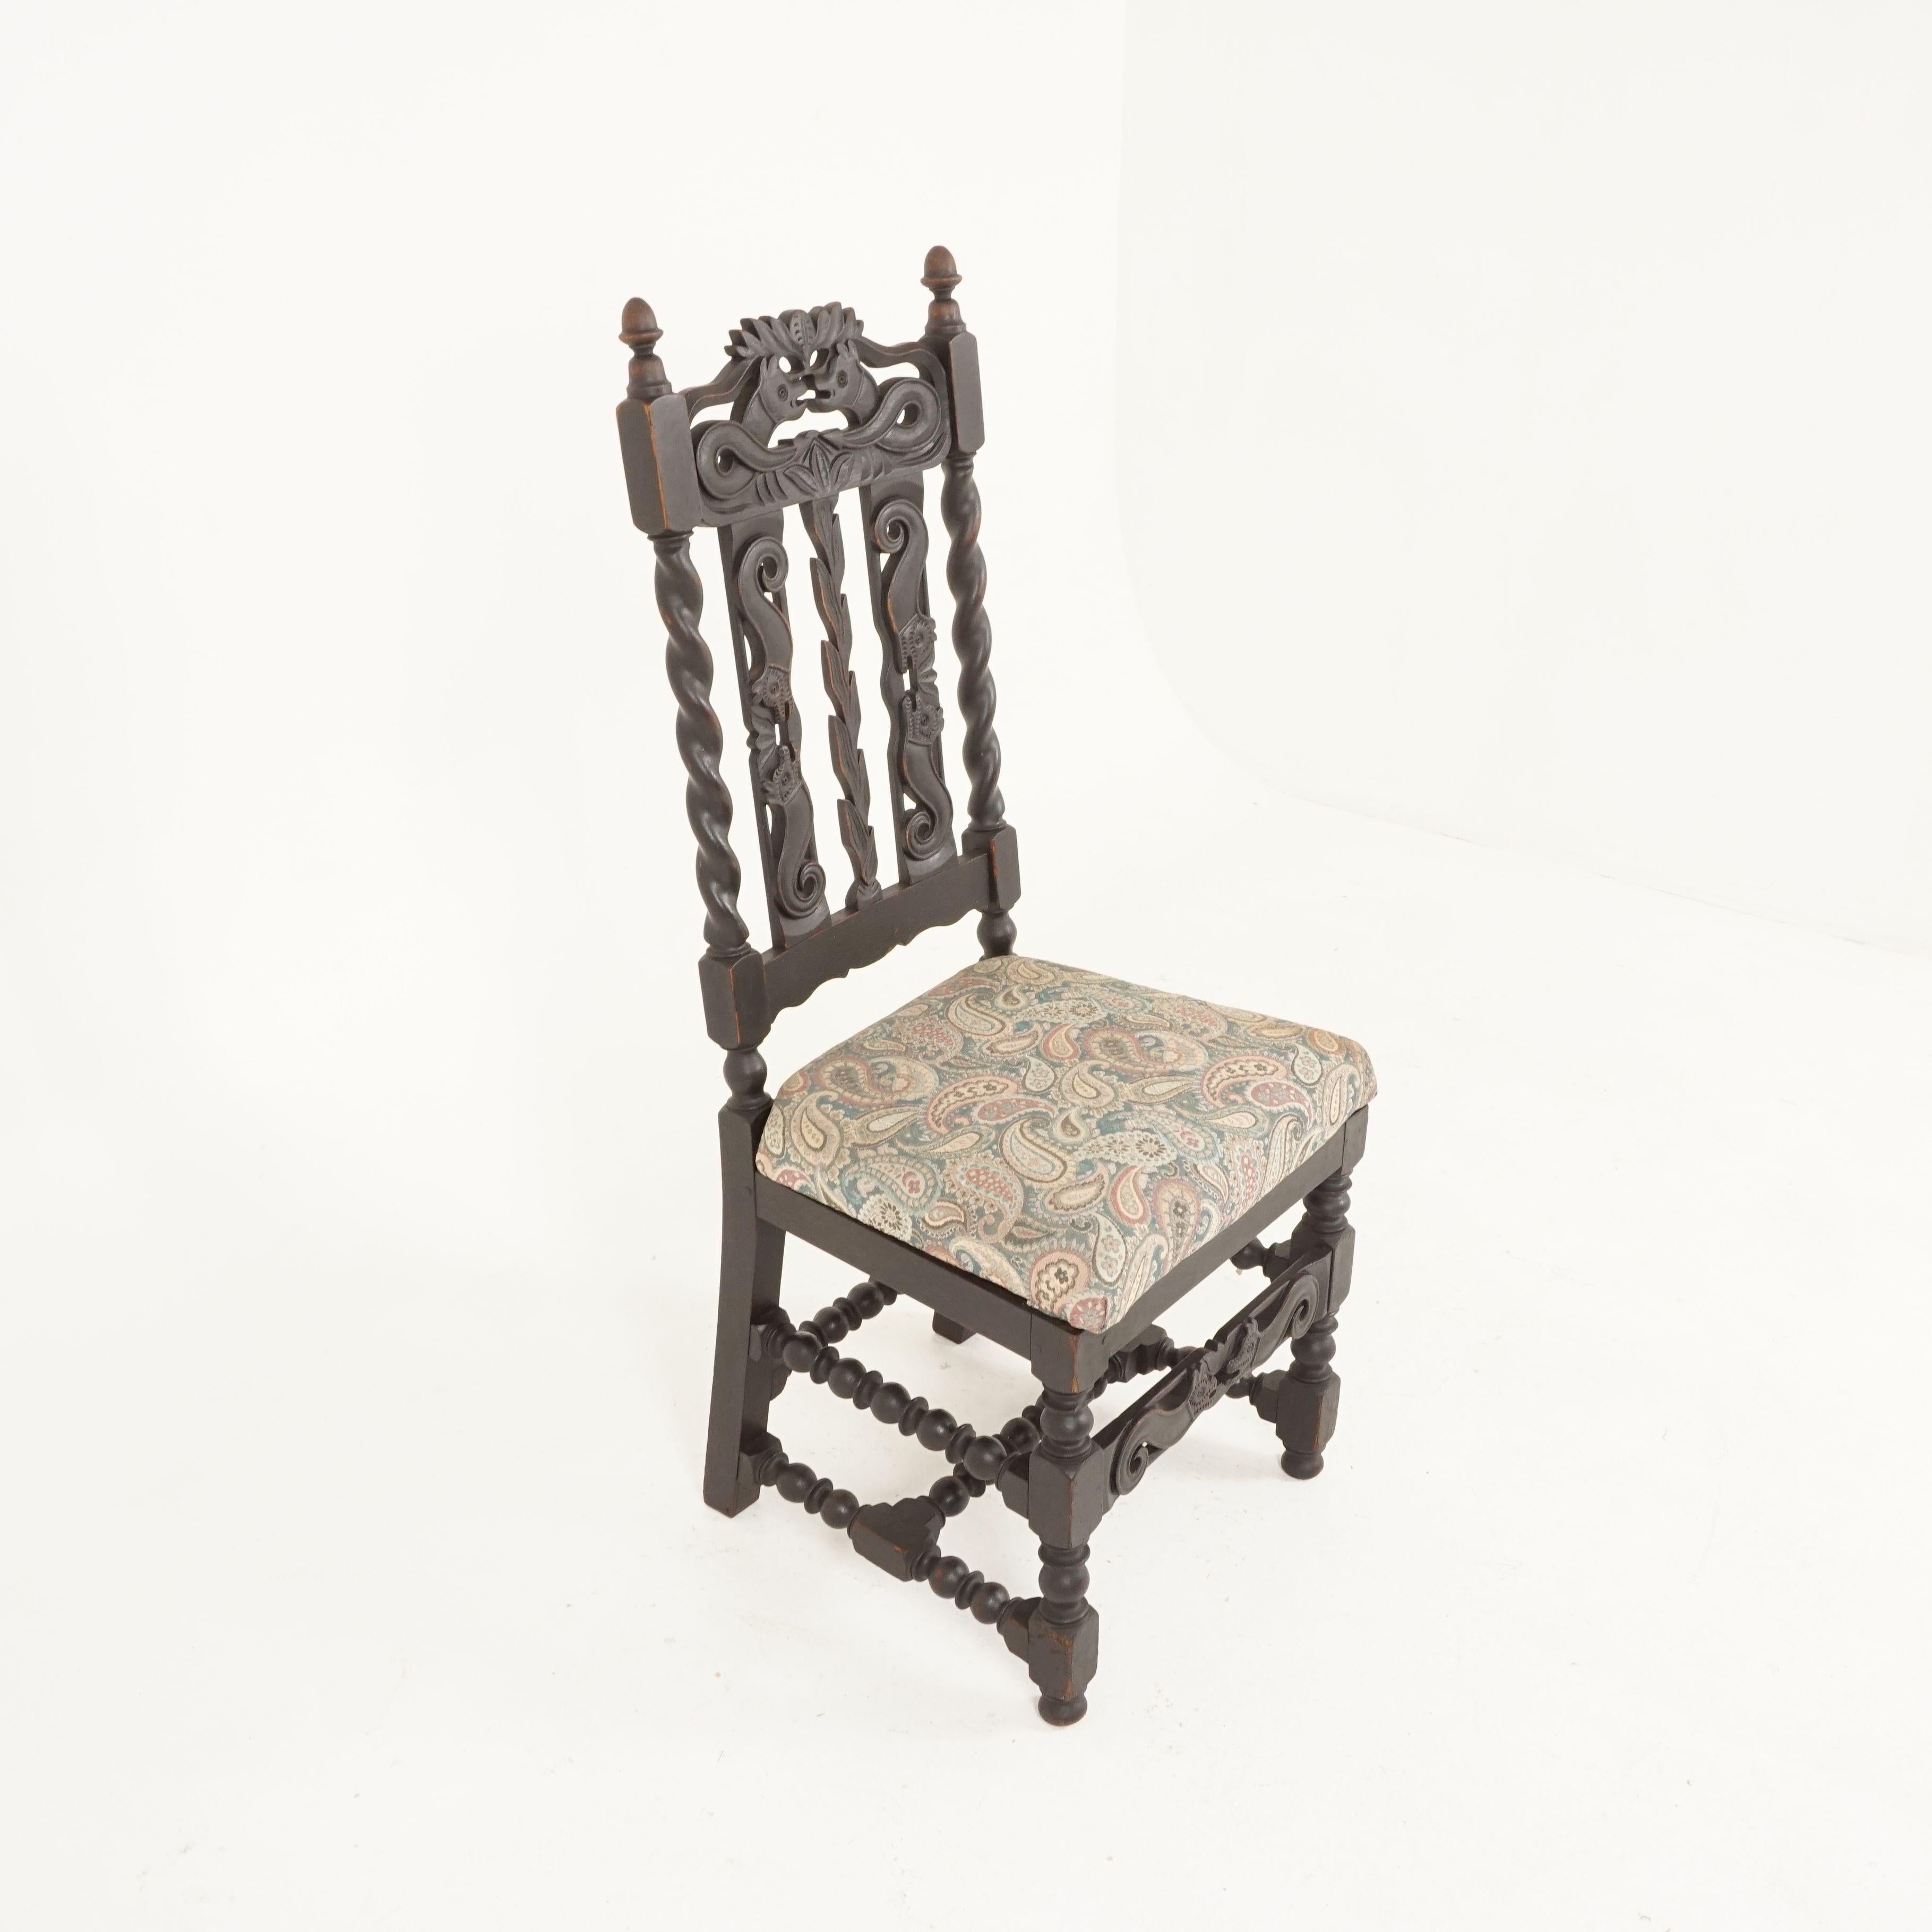 4 antique oak barley twist chairs, dining chairs, Scotland 1890, B1791

Scotland, 1890
Solid oak
Original finish
Carved open rail on top
Barley twist supports with finials on the top
Carved vertical slats on back
Large upholstered lift out